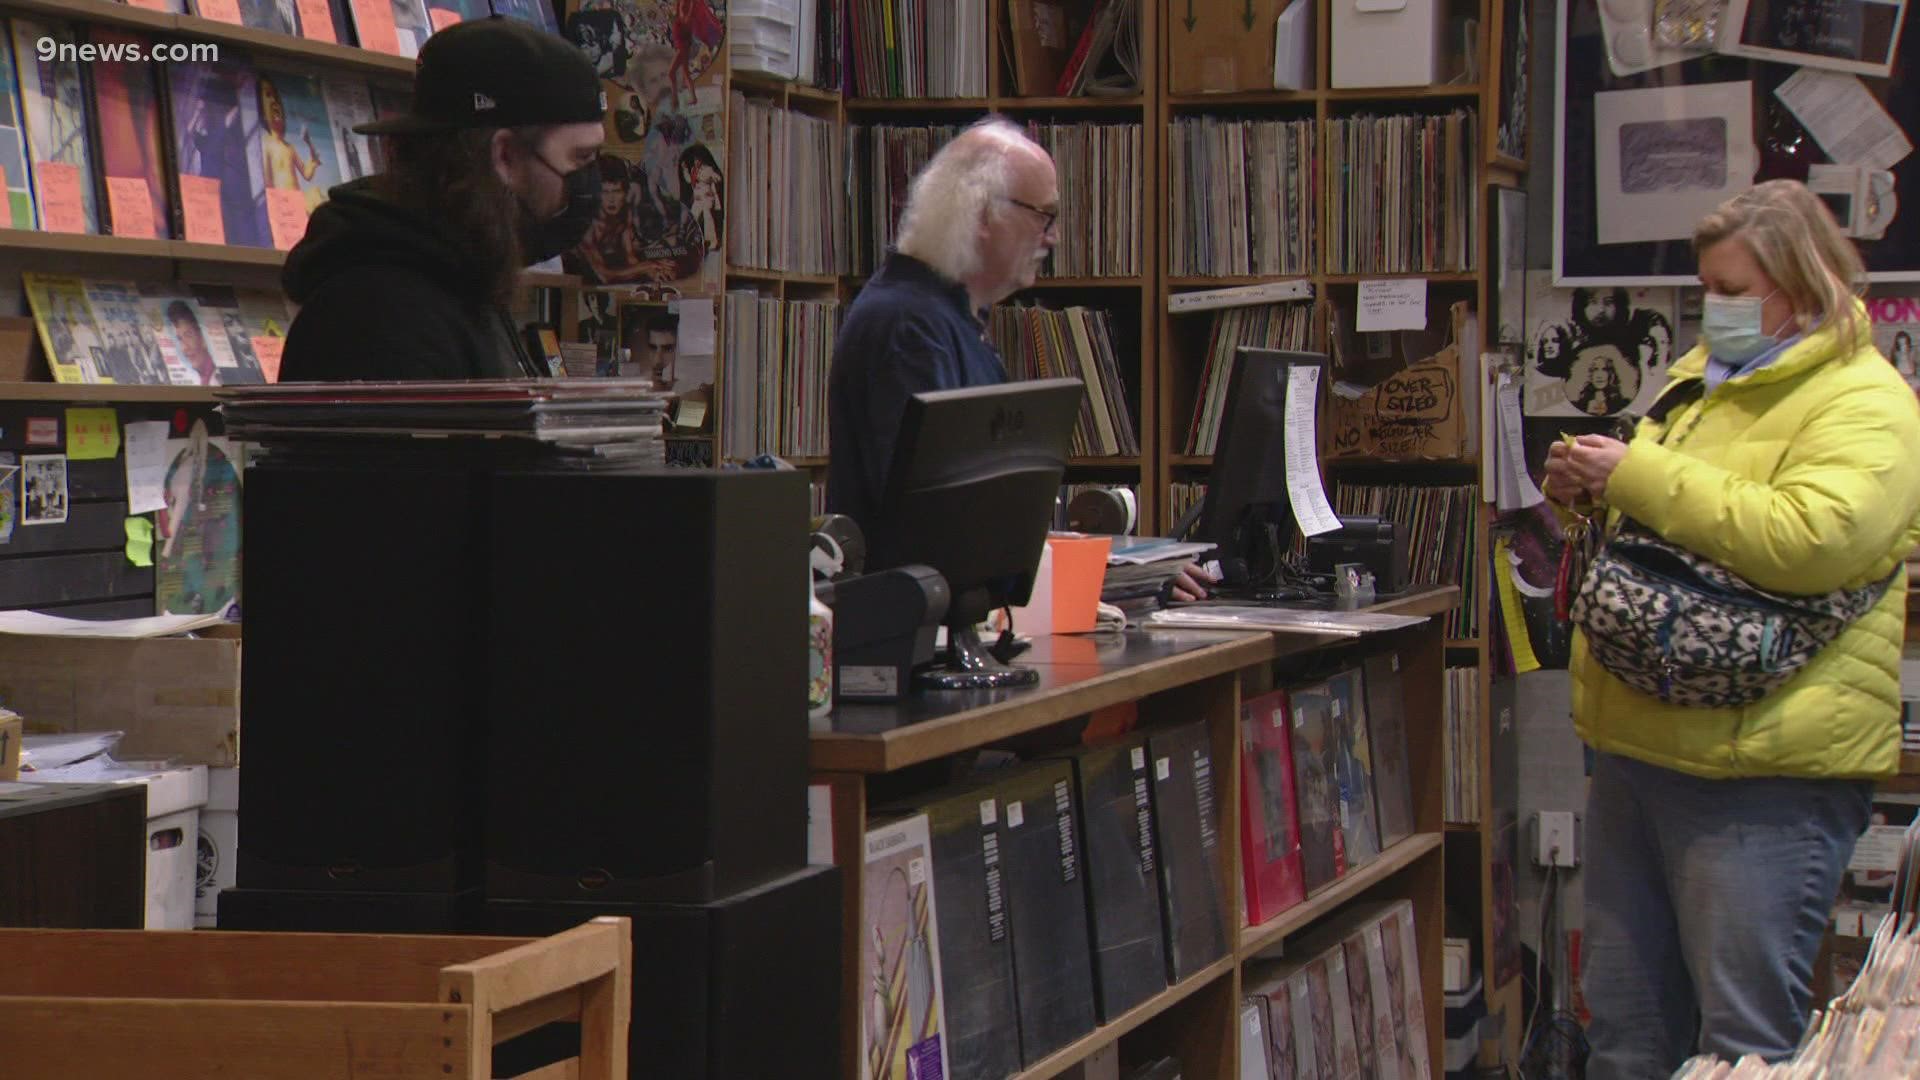 After 33 years of running legendary record store Twist and Shout, owners Jill and Paul Epstein have decided it's time to retire.